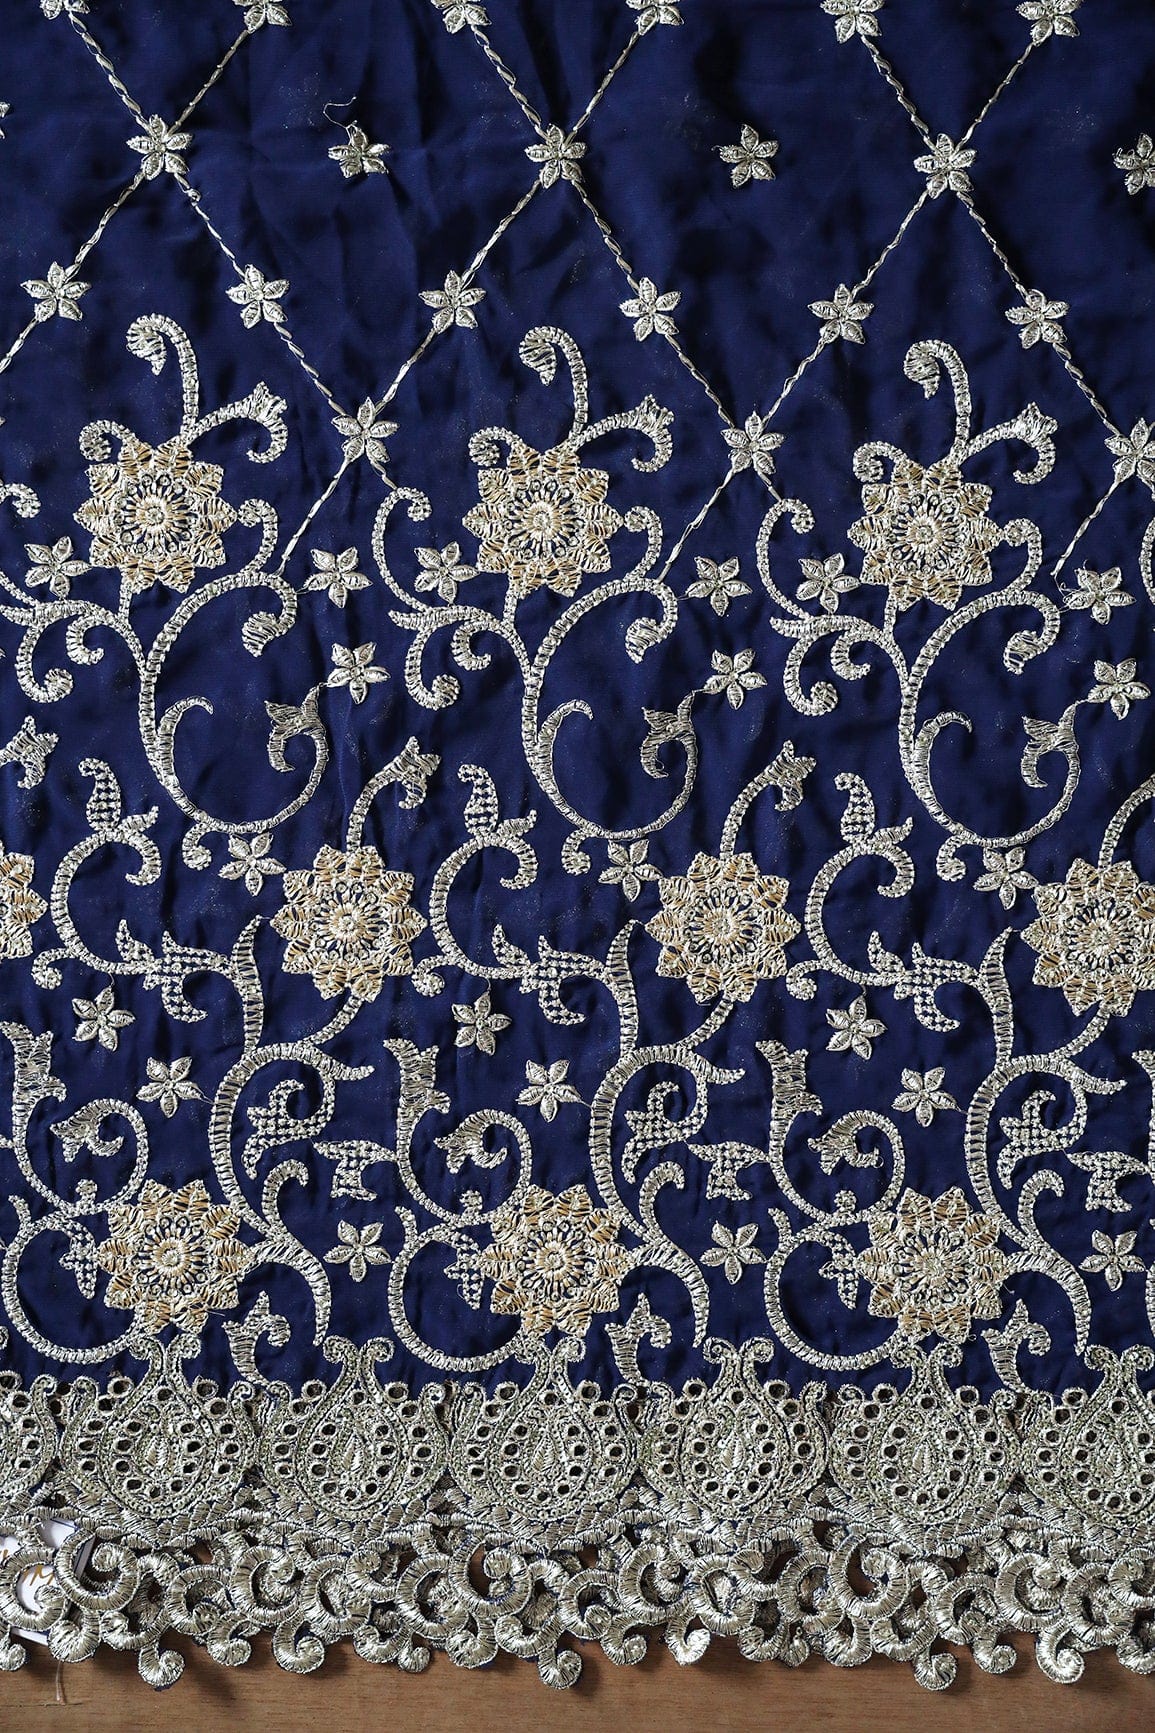 doeraa Embroidery Fabrics Big Width''56'' Gold And Silver Zari Floral Embroidery Work On Navy Blue Georgette Fabric With Border